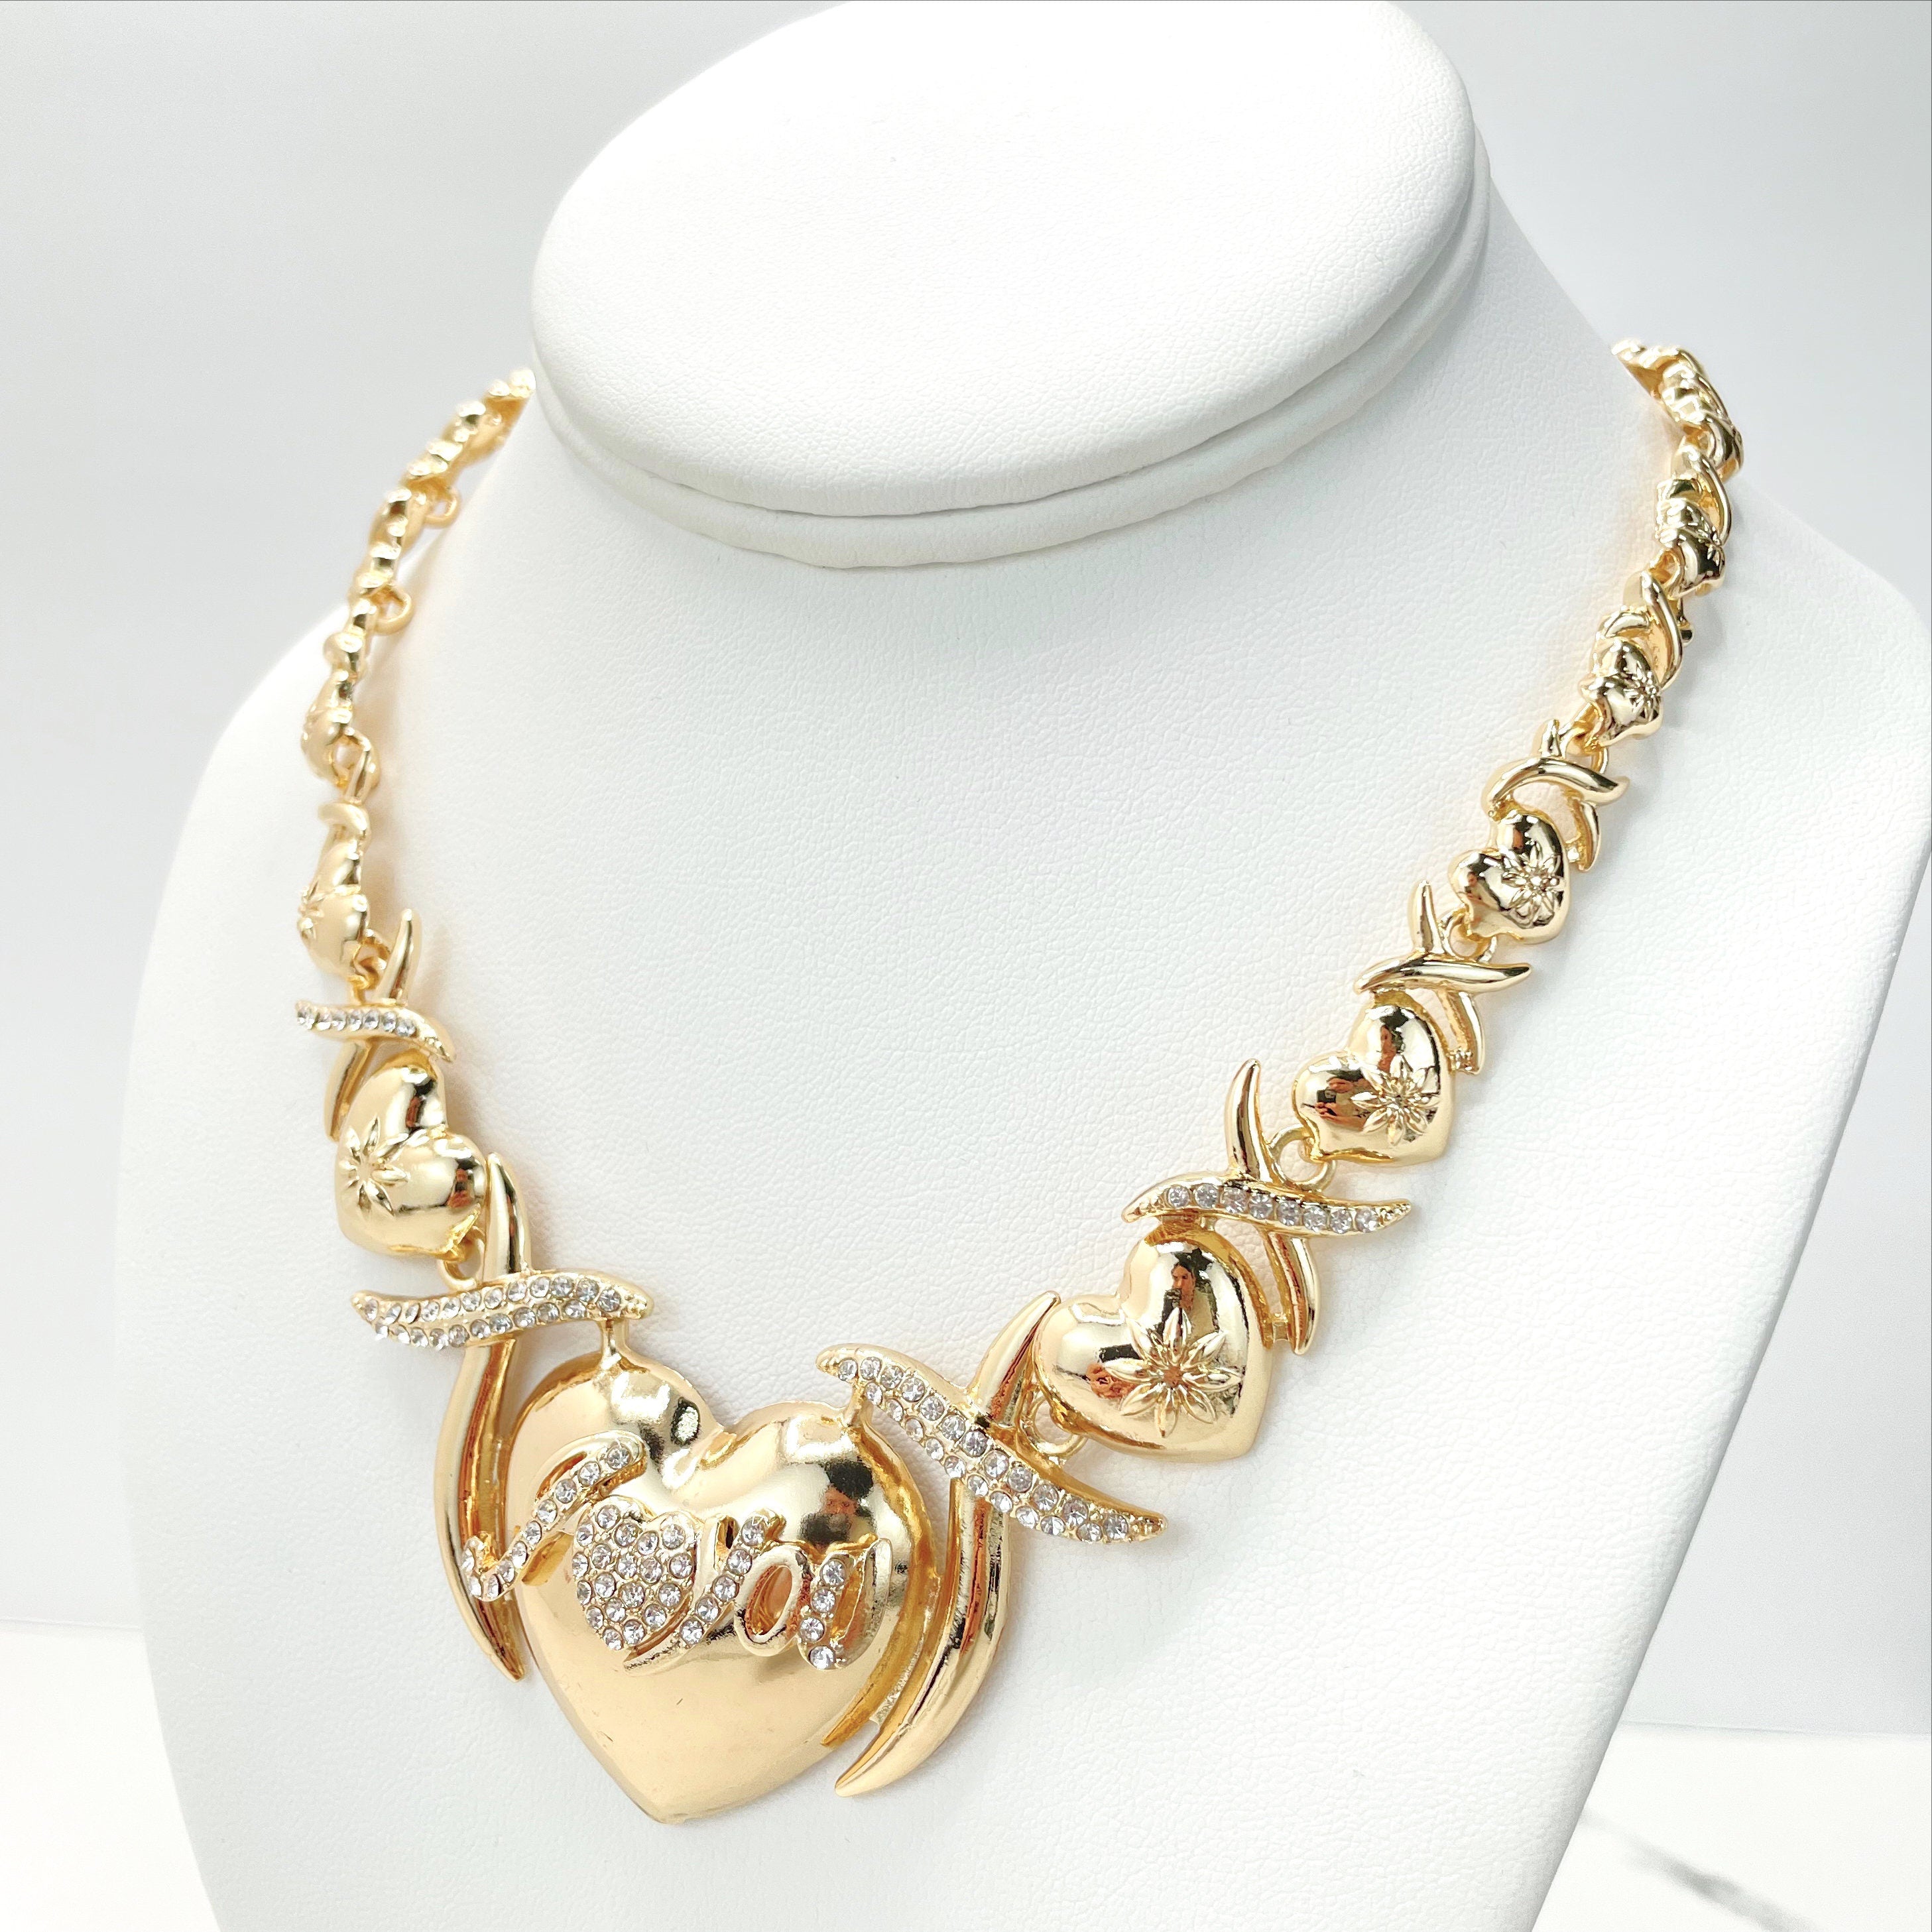 Buy Kiss Gold Necklace Online In India - Etsy India